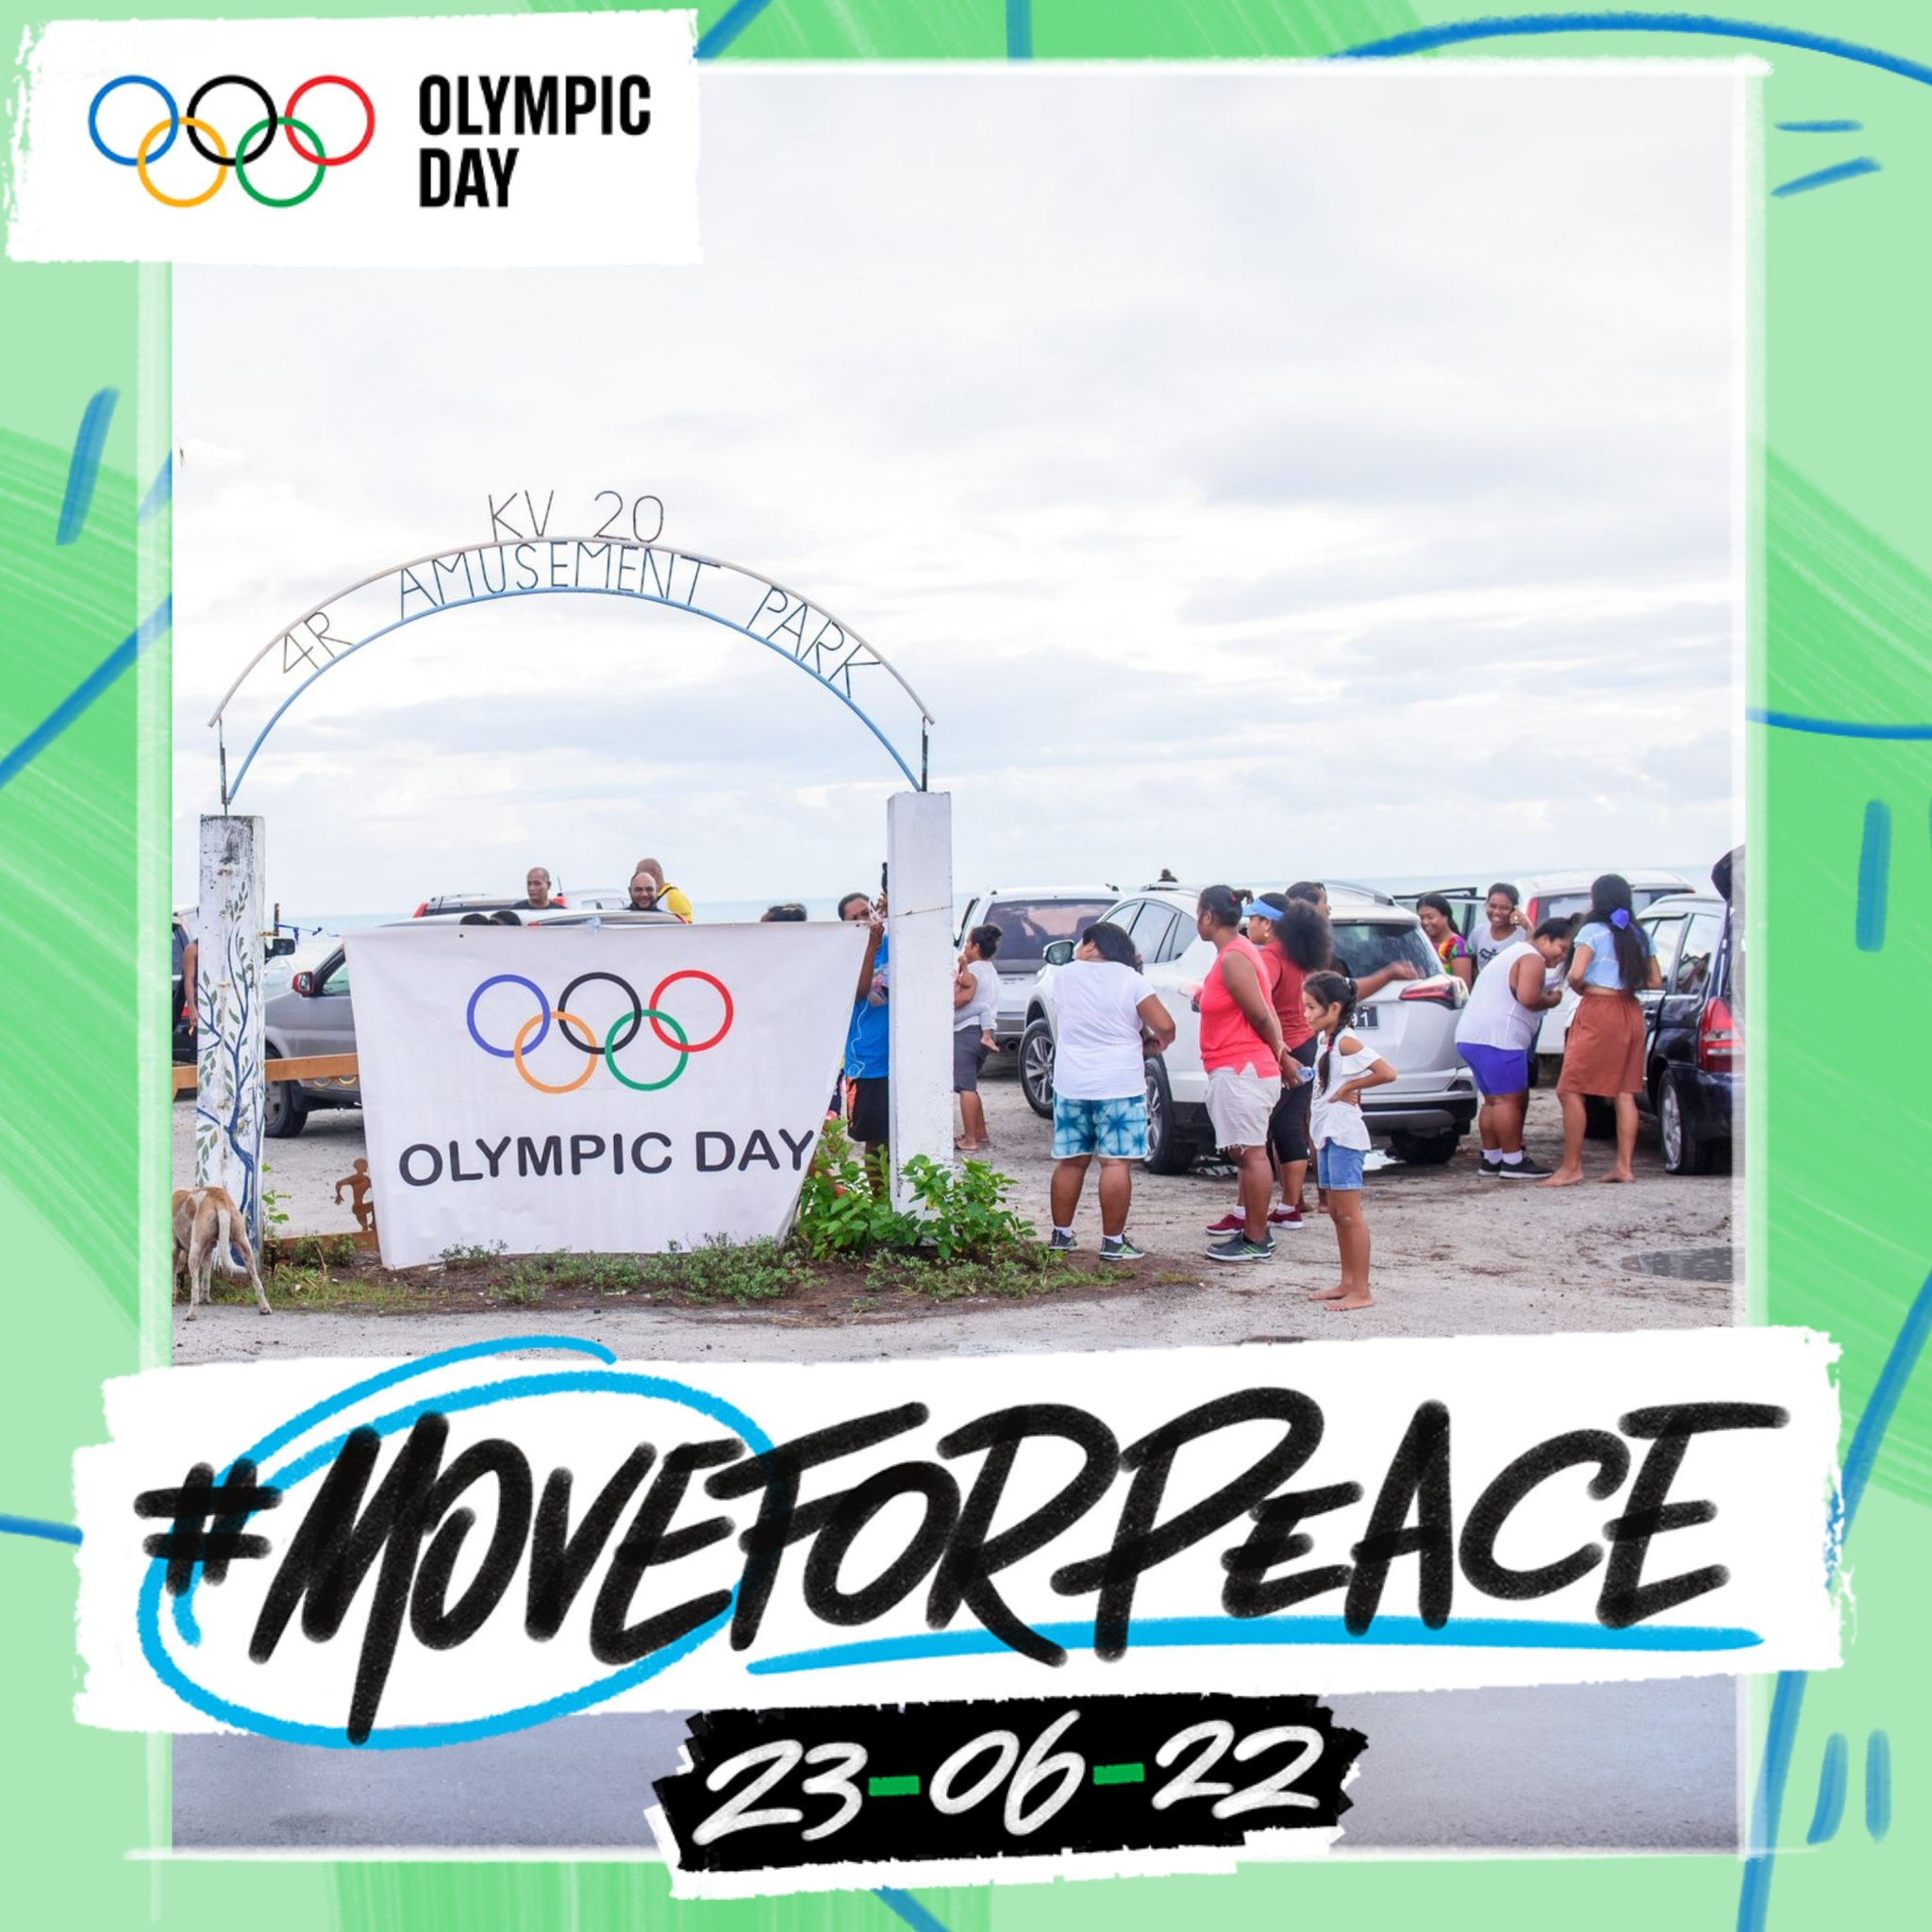 The Kiribati National Olympic Committee sought to engage schools, communities and the general population on Olympic Day ©KNOC